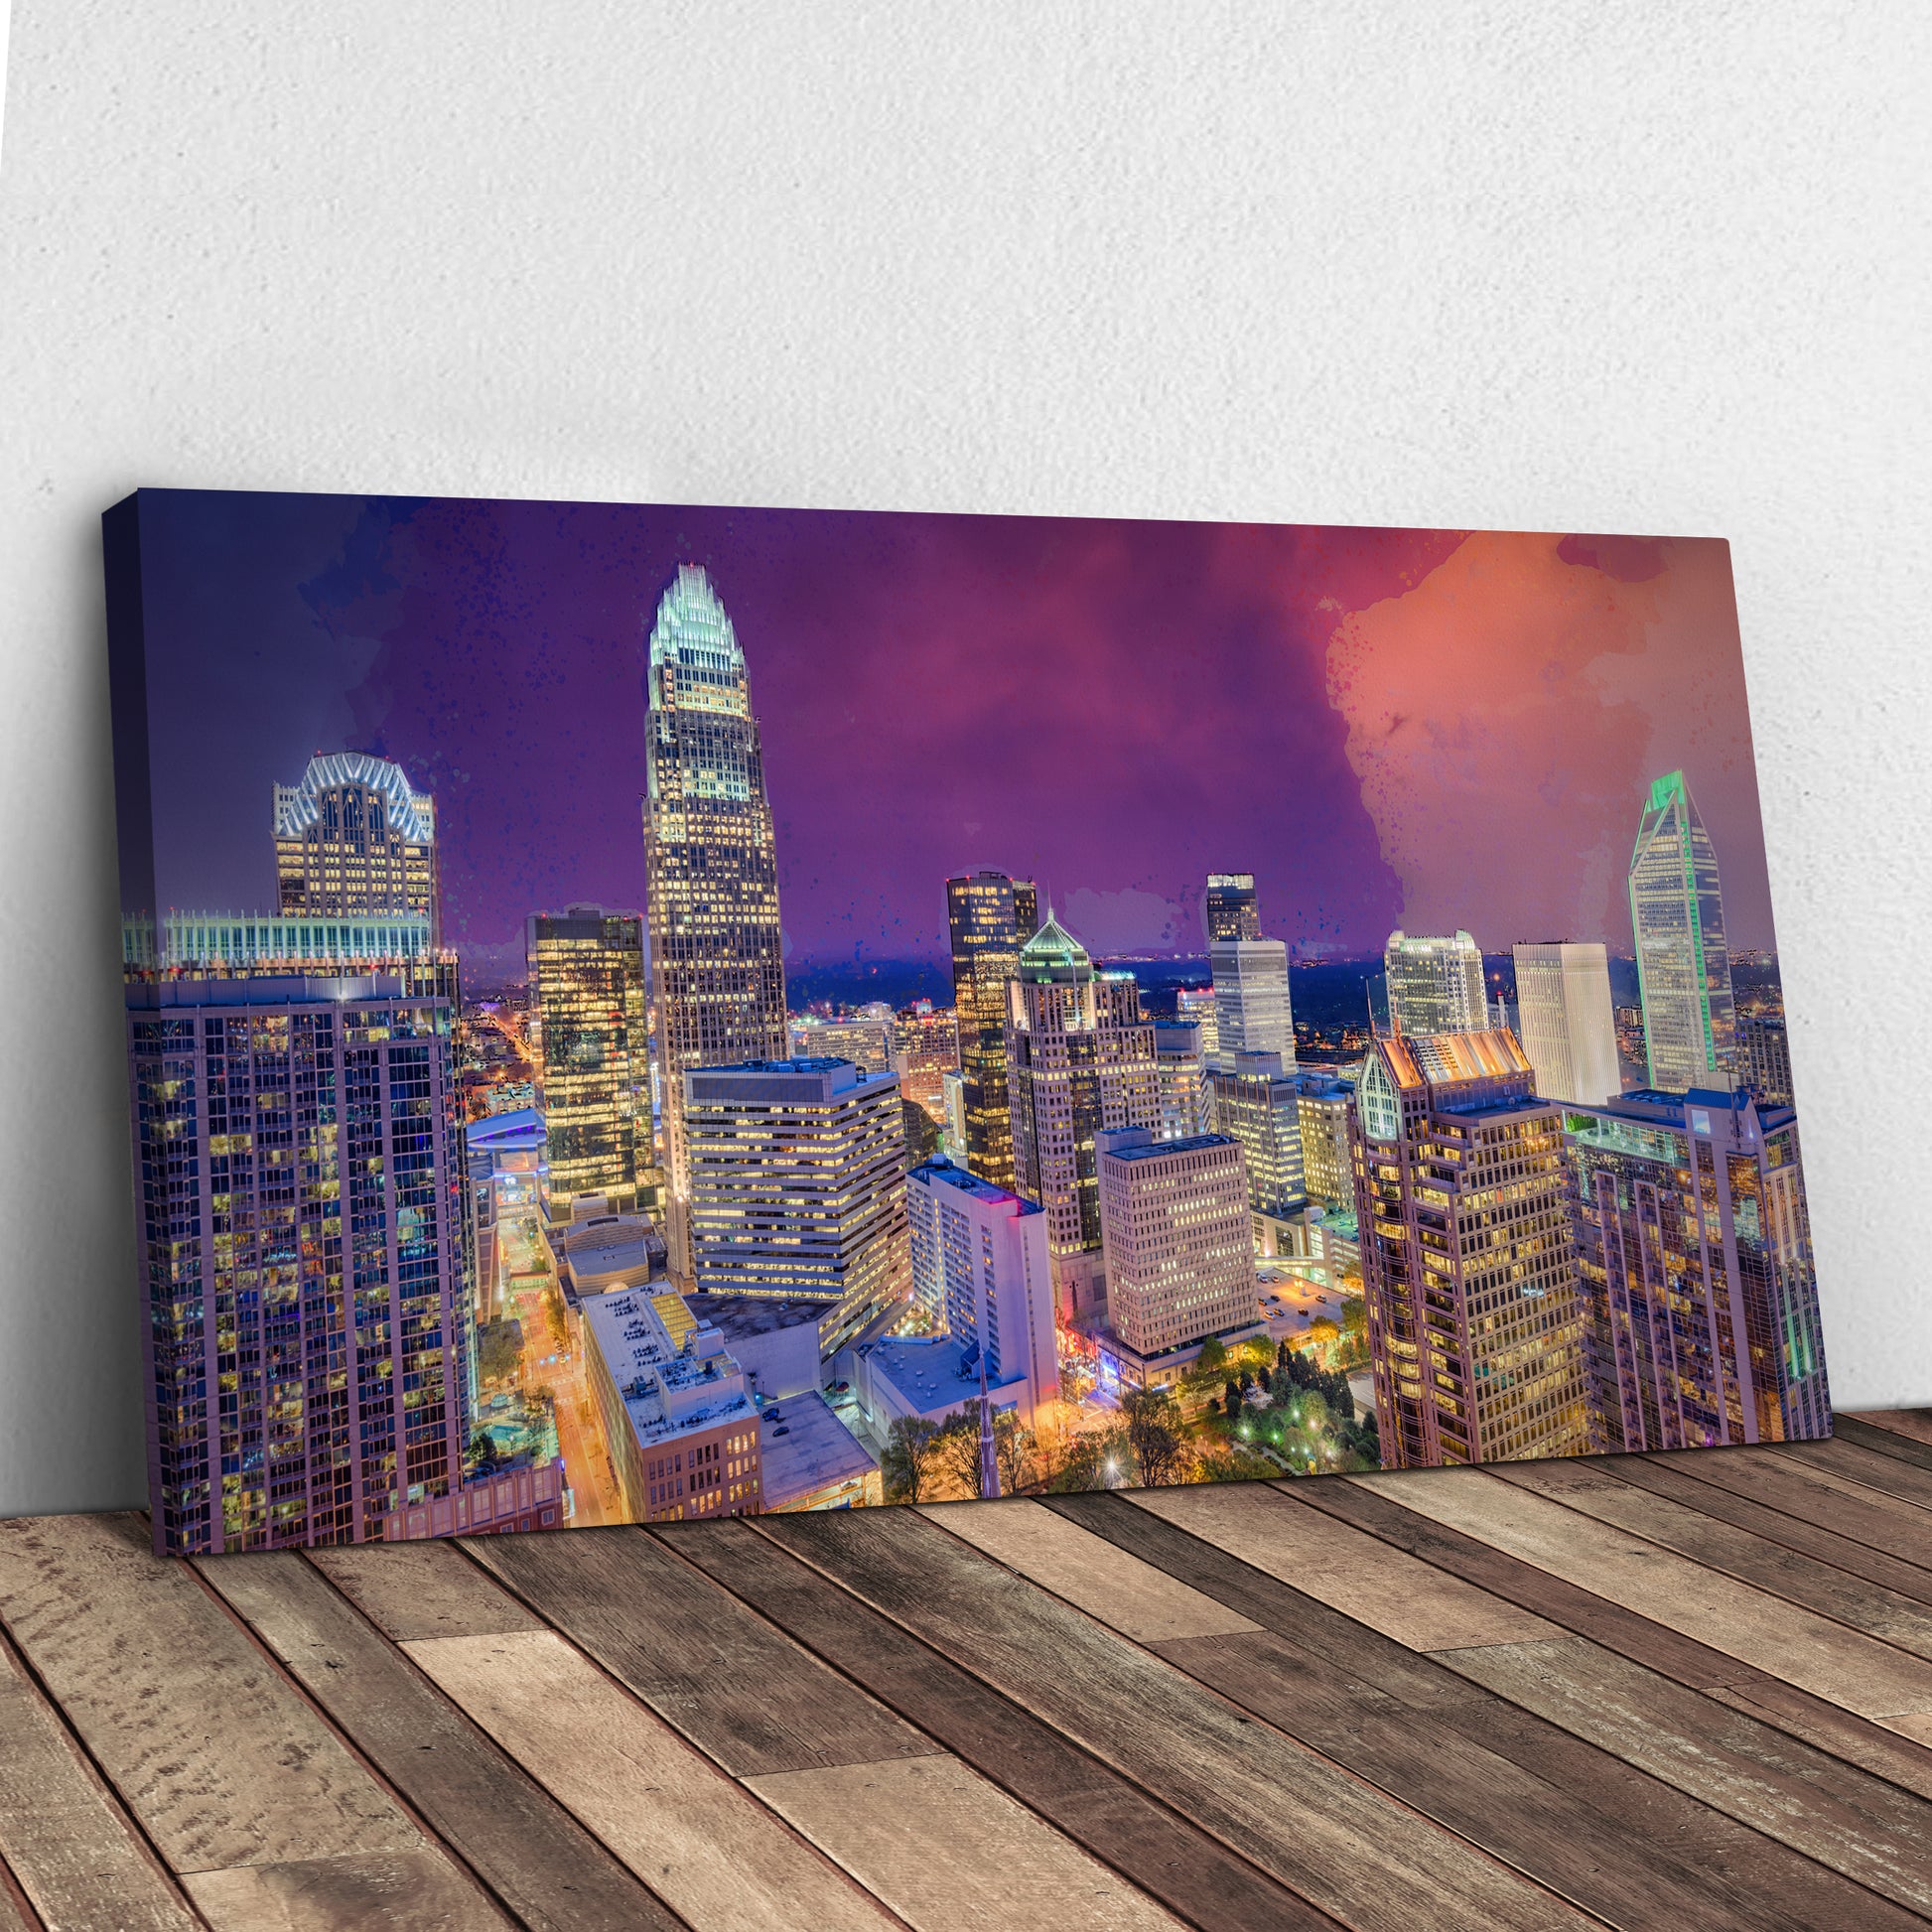 Charlotte Skyline Queen City At Dusk Canvas Wall Art Style 1 - Image by Tailored Canvases